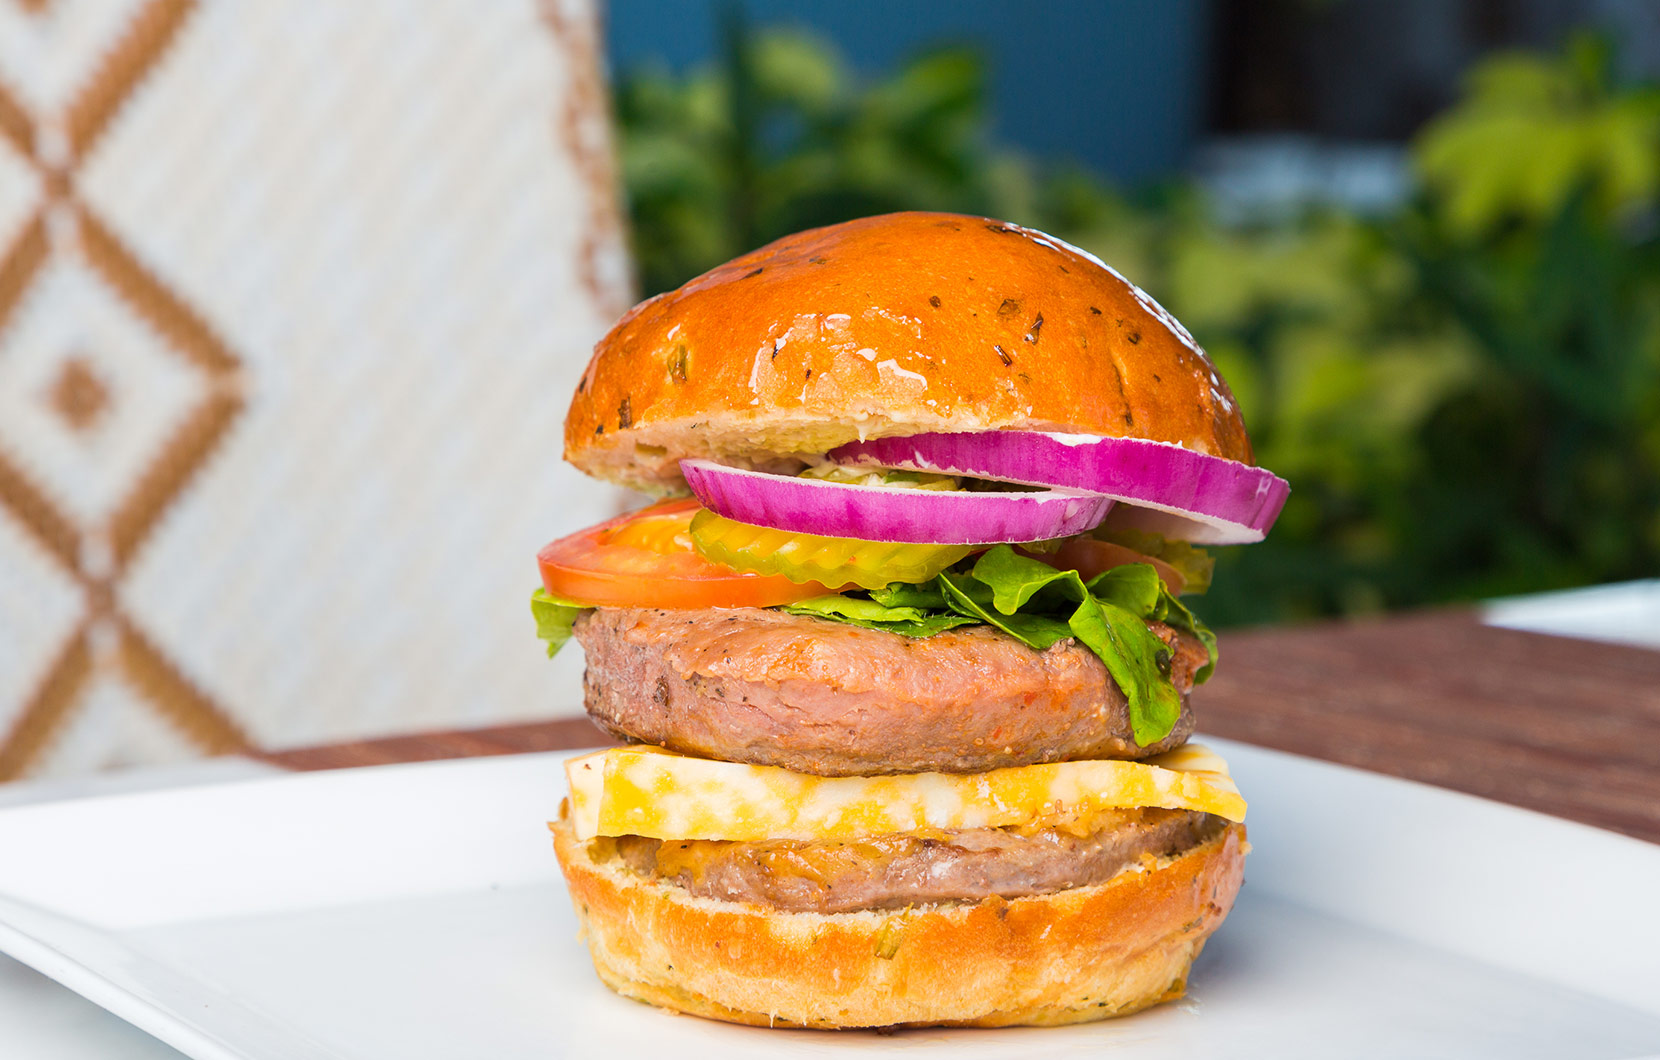 Chef Maribel’s burger is not for the faint of appetite.